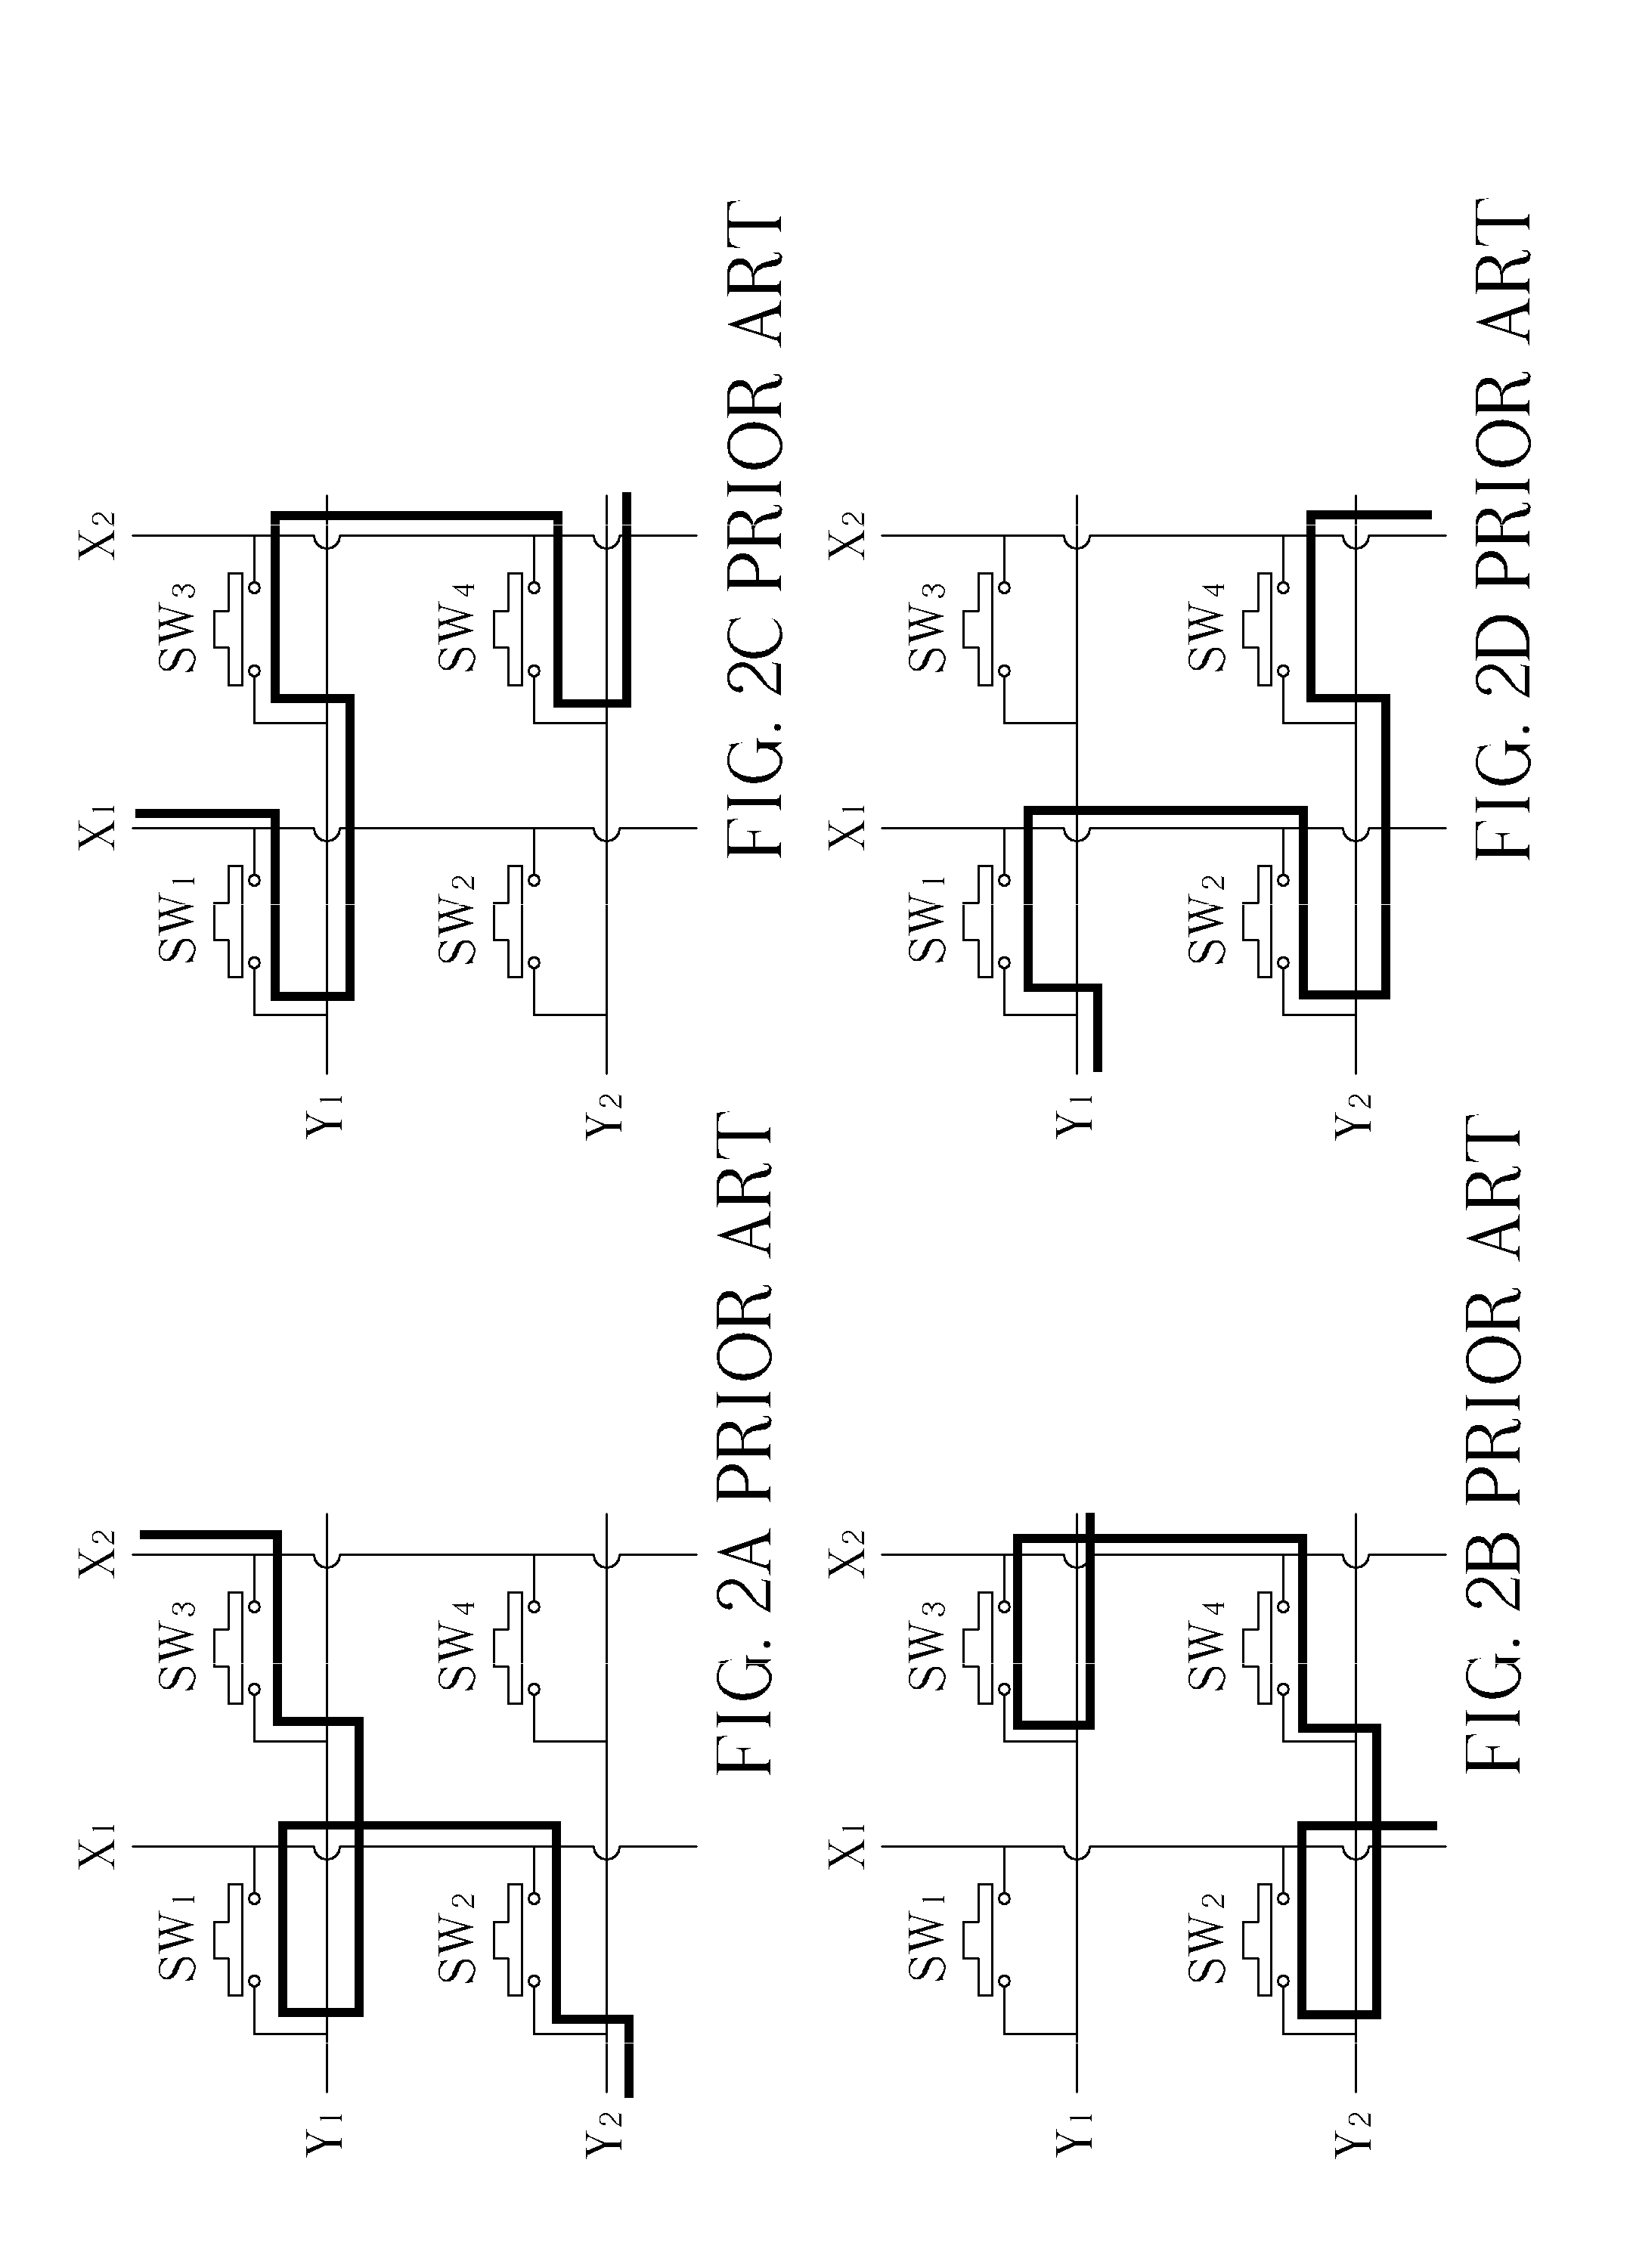 Ghost key detecting circuit and related method